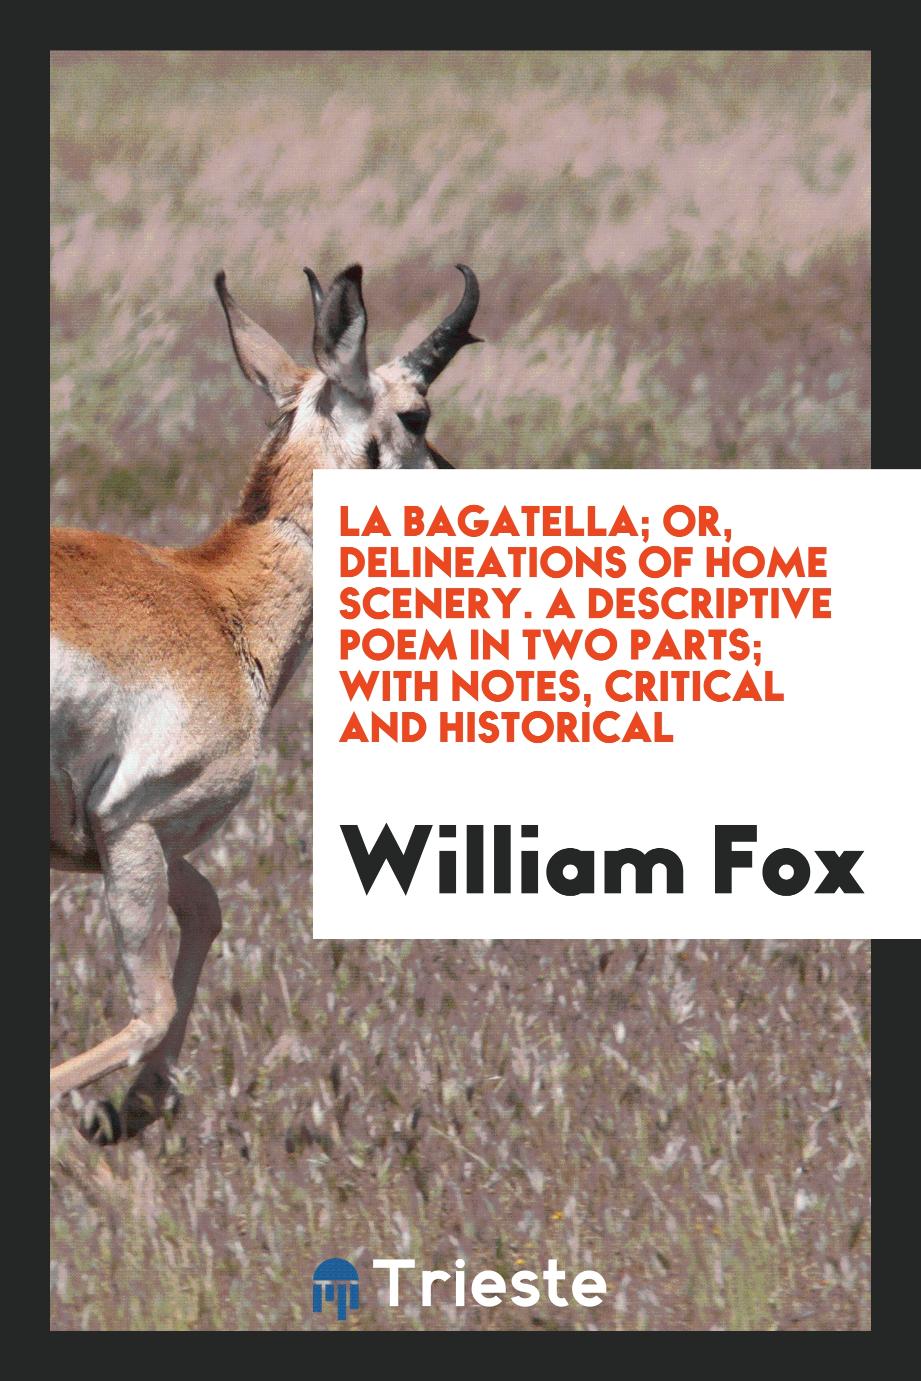 La Bagatella; or, Delineations of home scenery. A descriptive poem in two parts; with notes, critical and historical